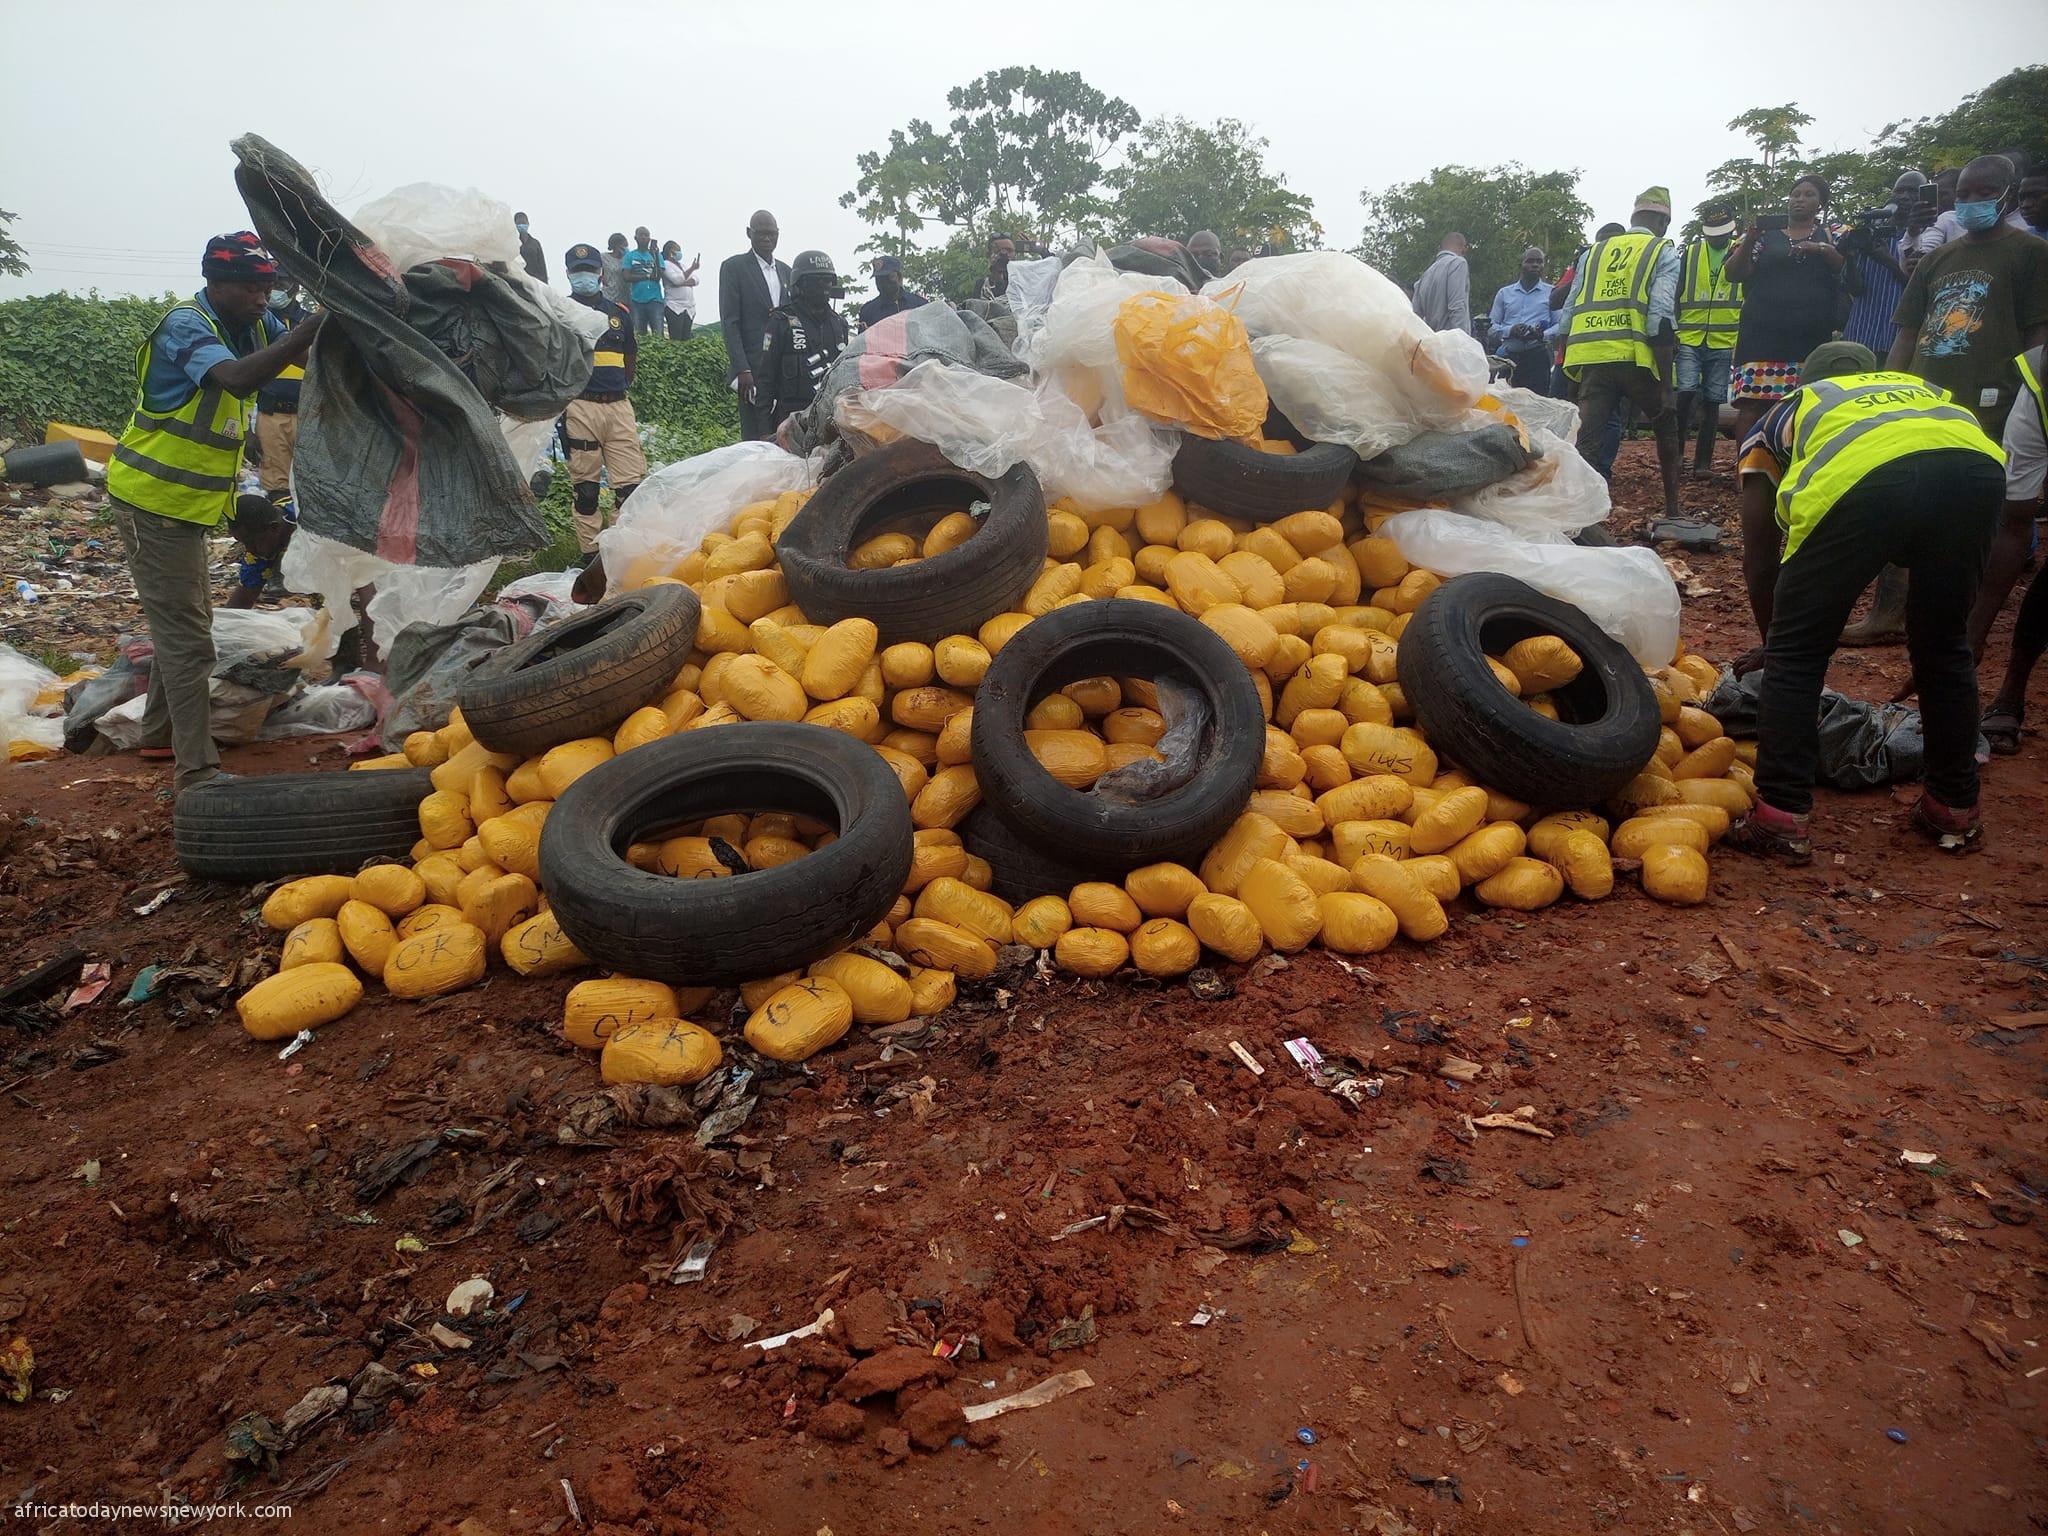 Police Smashes ₦10 million Worth Of Drugs In Lagos